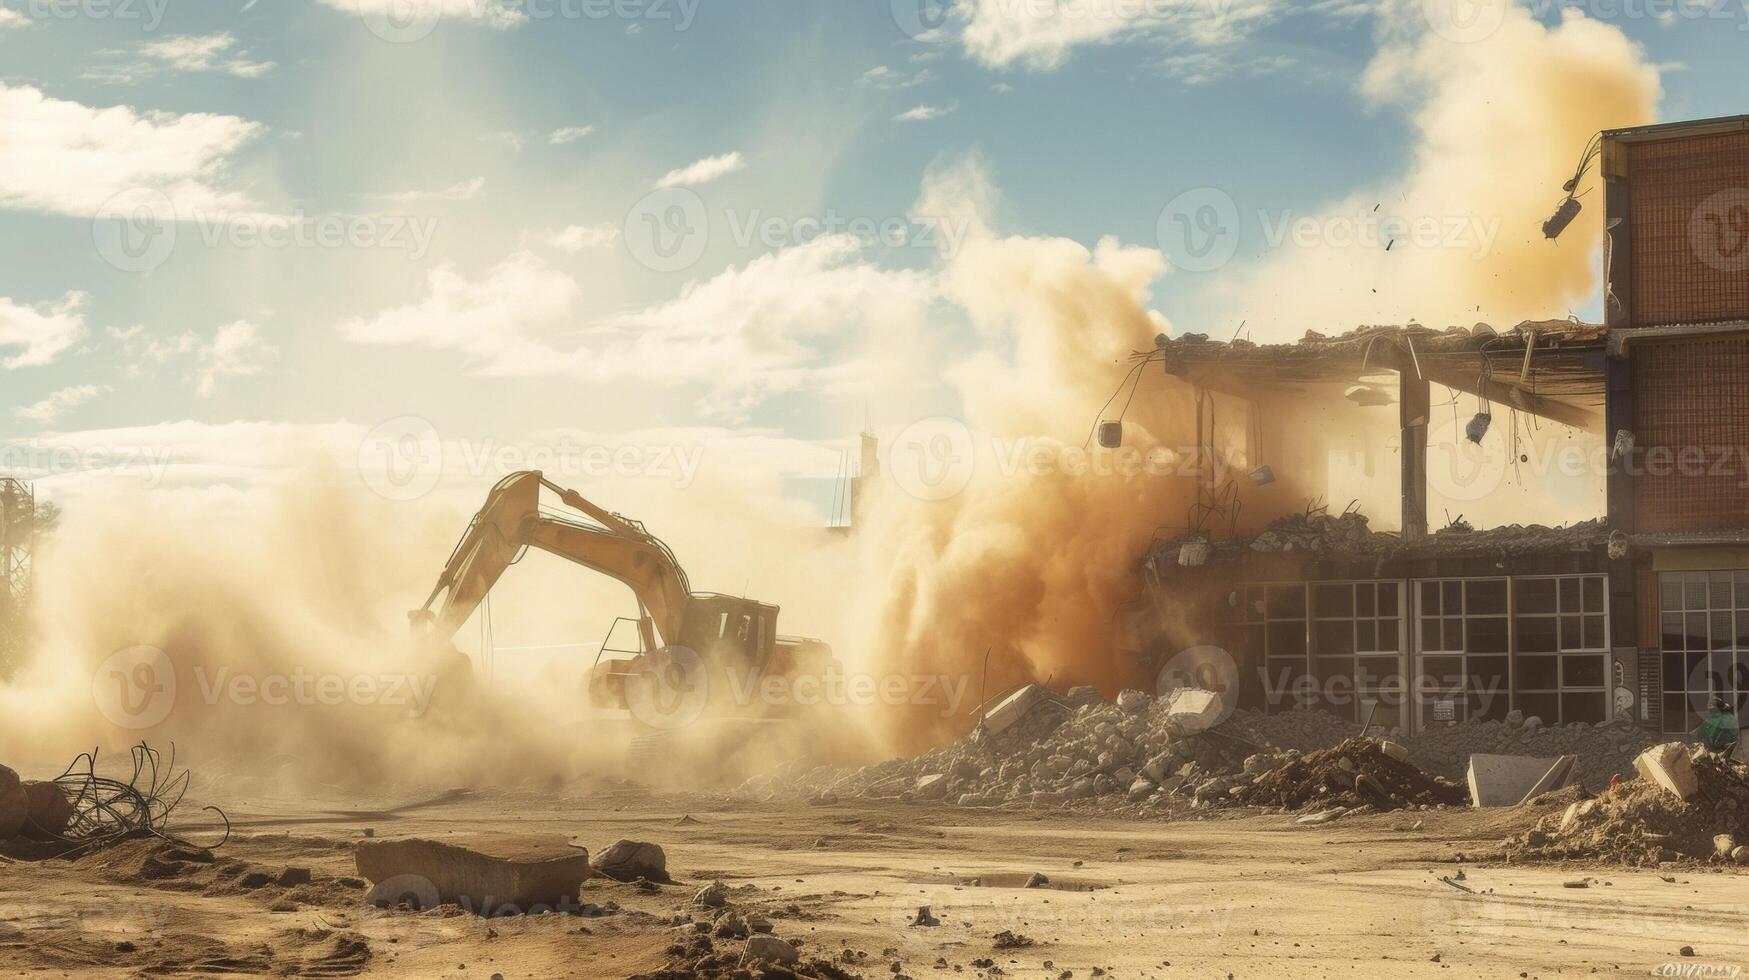 Clouds of dust rising as demolition crews use heavy machinery to break apart an old building and make space for a new modern design photo